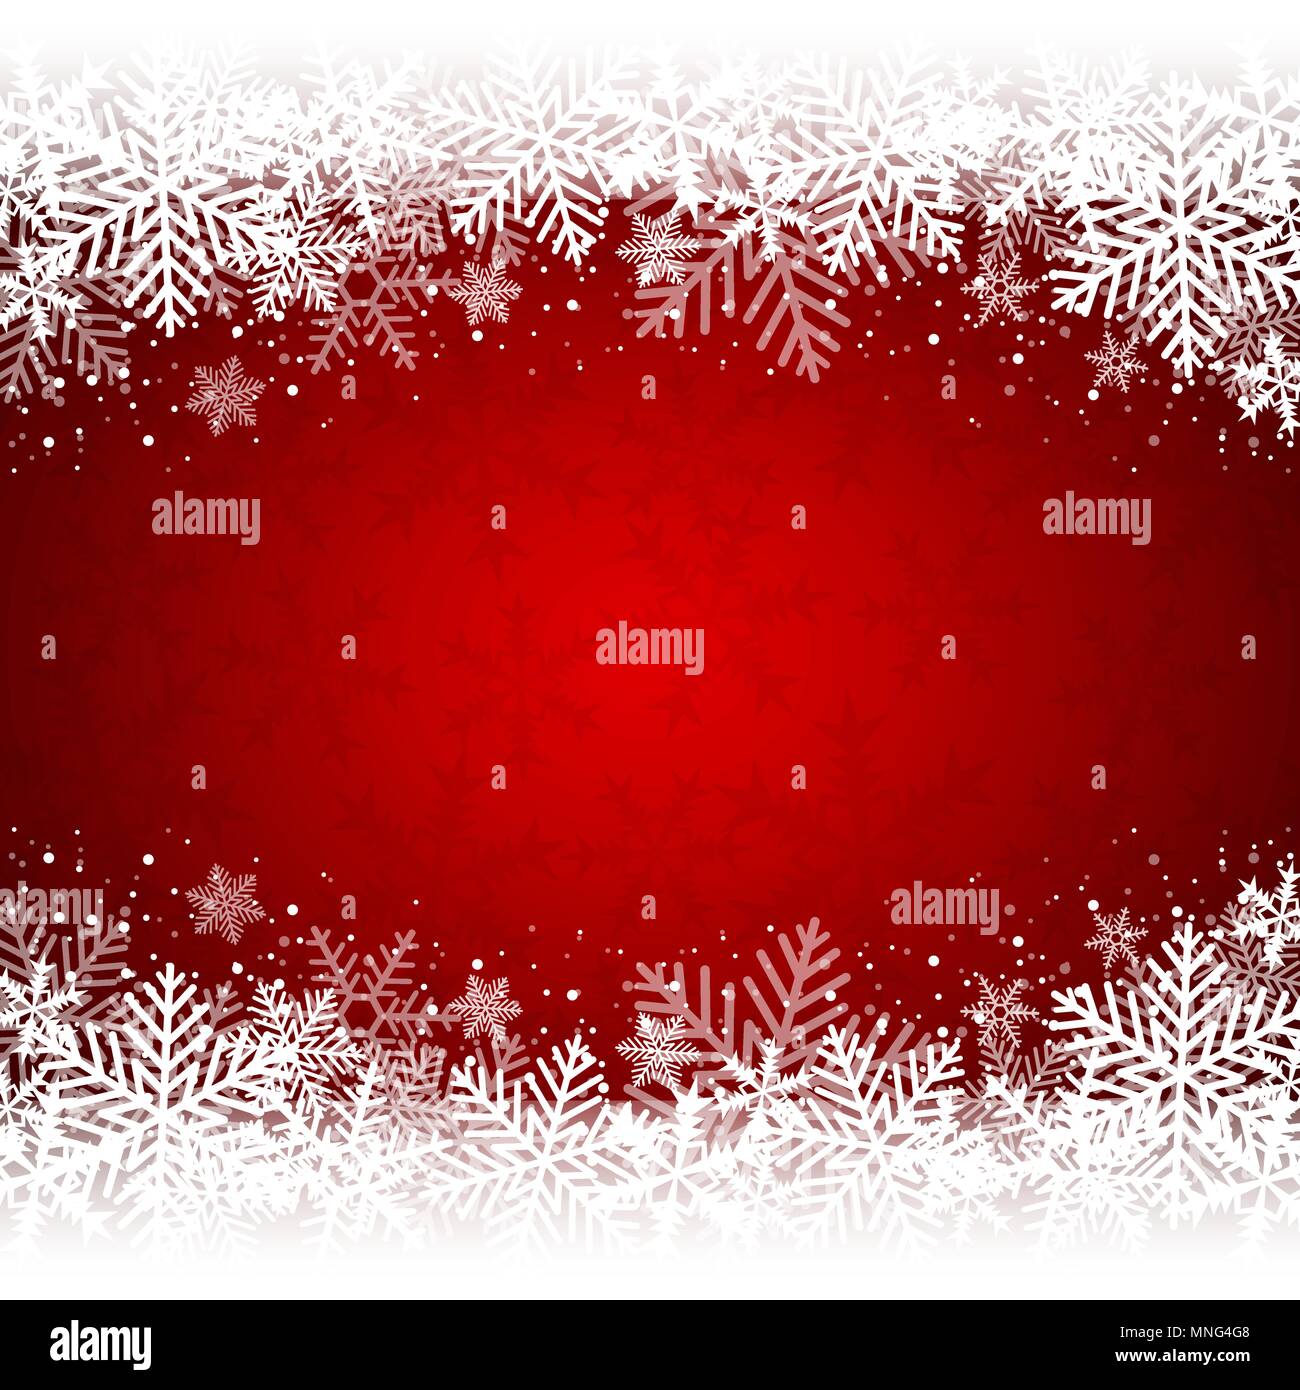 Decorative red Christmas background with white snowflakes. Vector illustration. Stock Vector